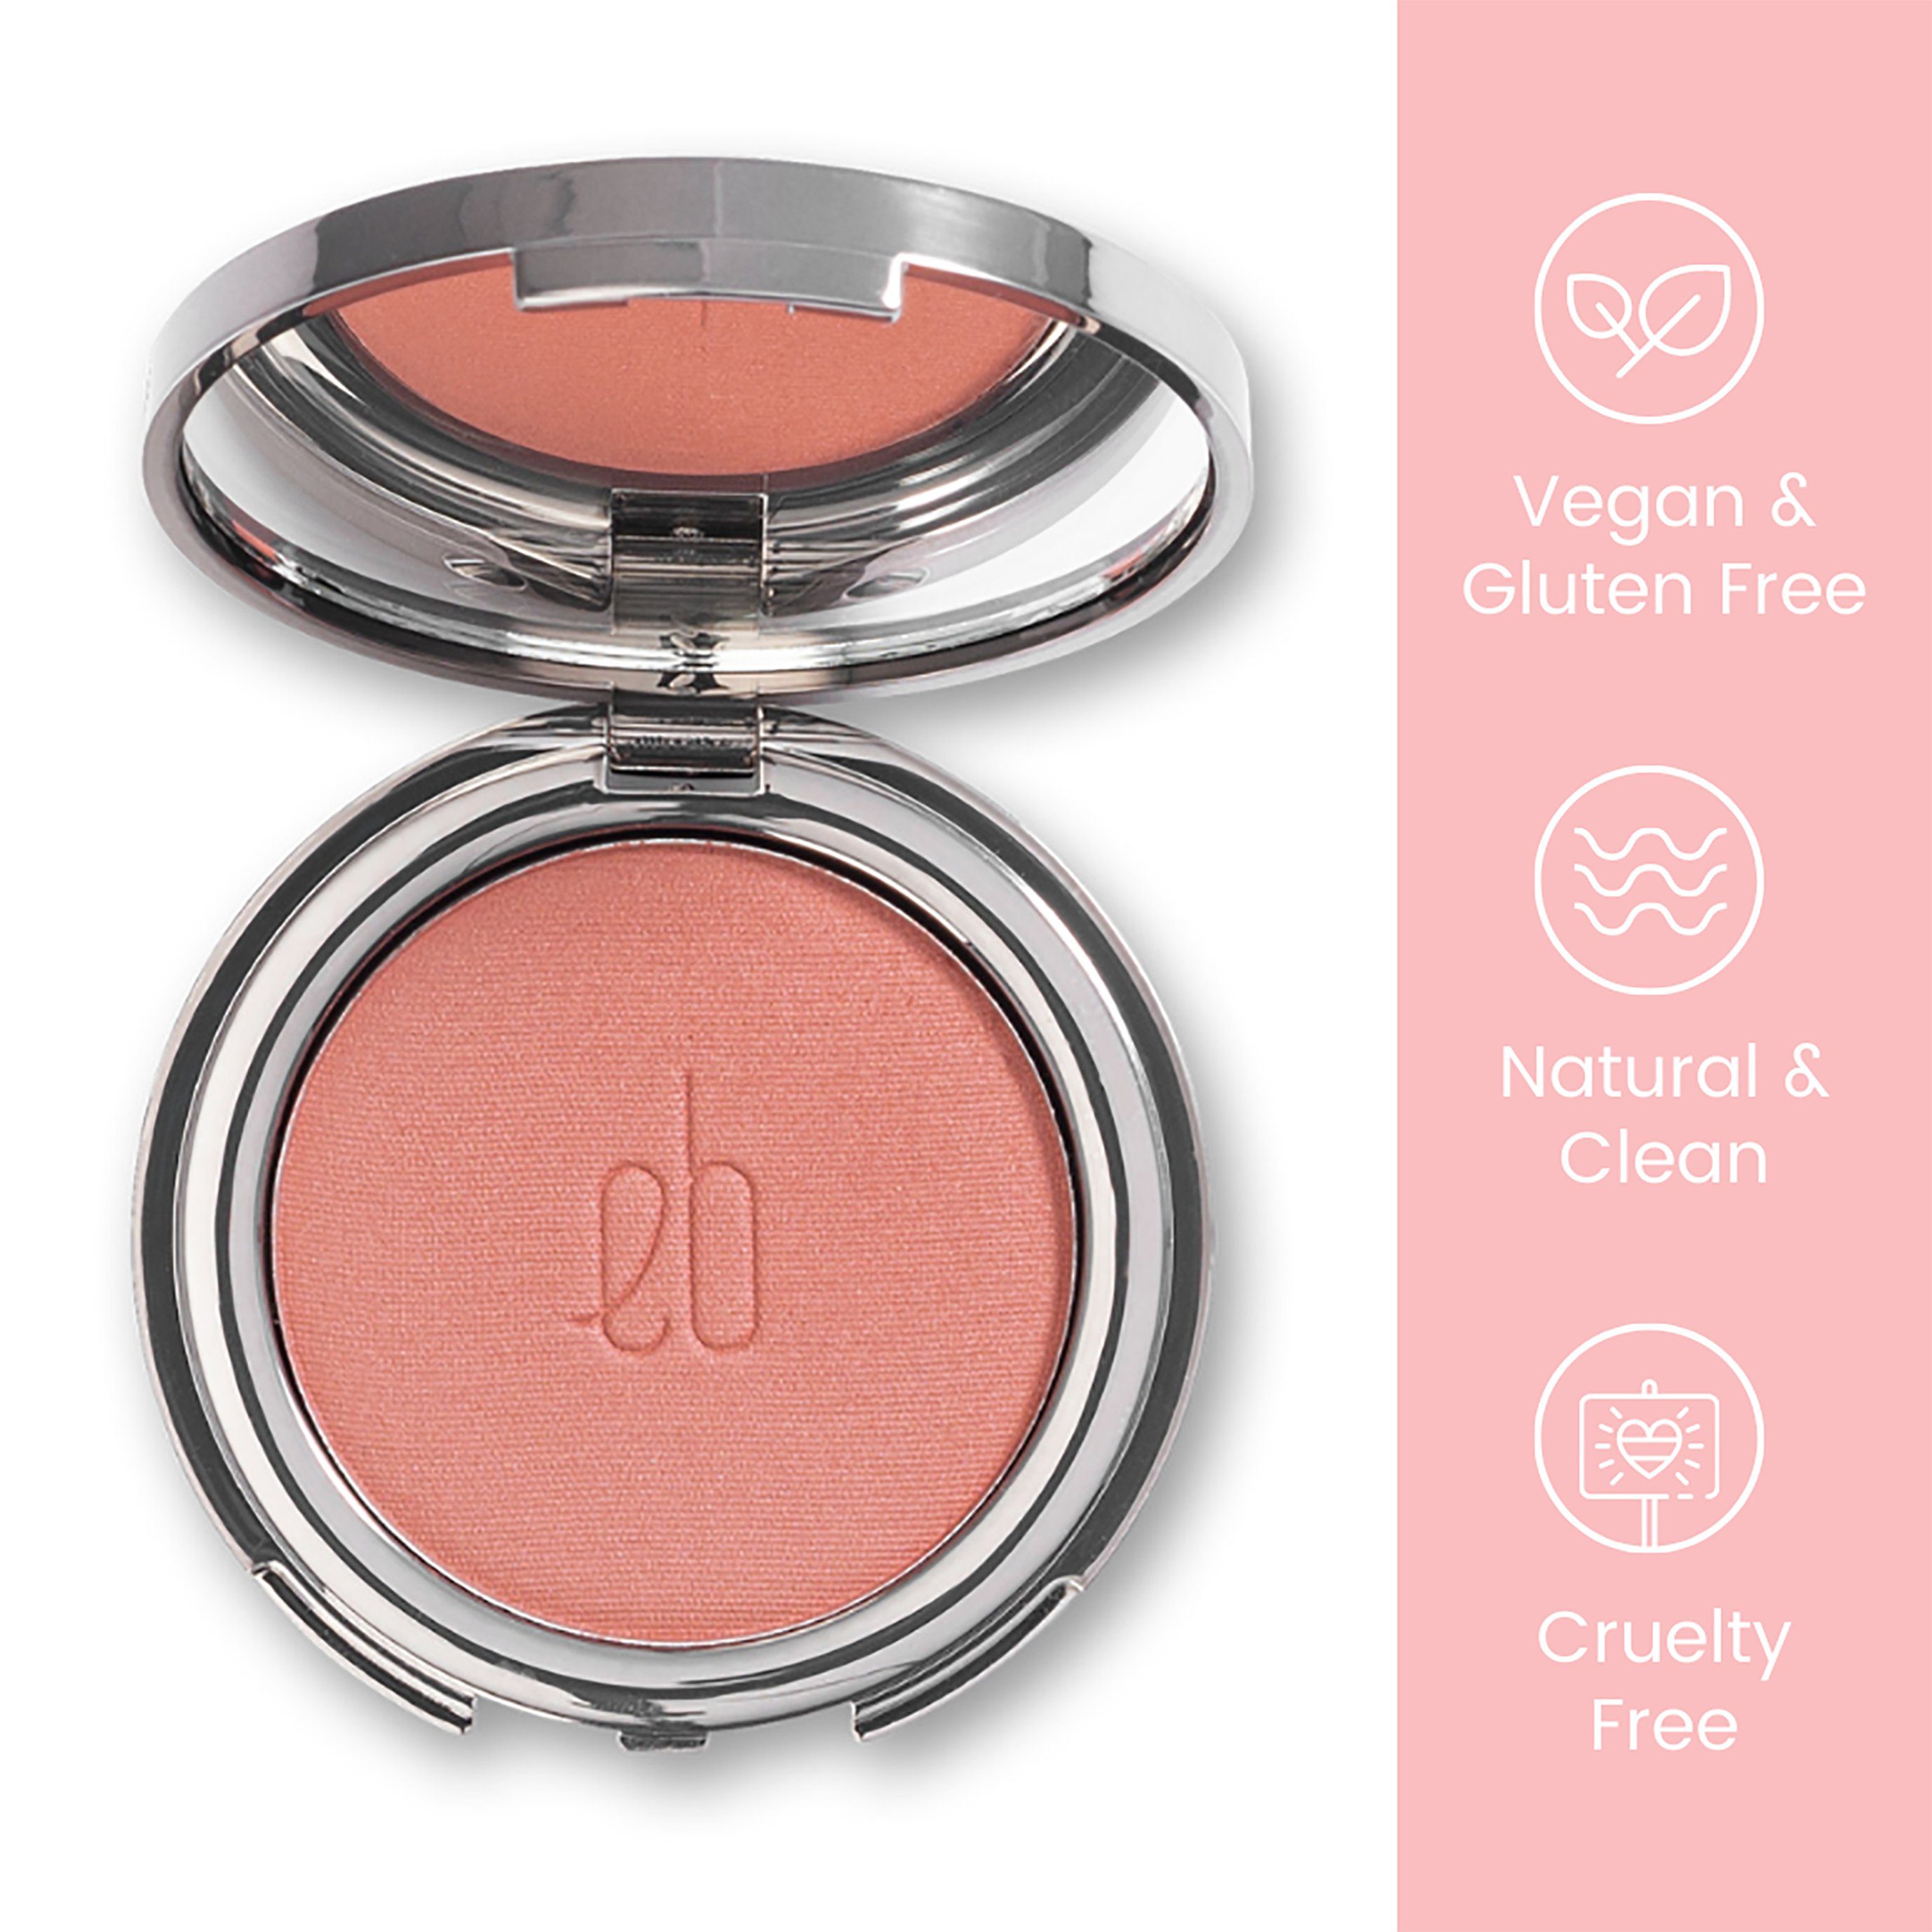 Rouge-Palette Mineral Veil Veil Gluten Rouge, ETHEREAL Clean, Langhaltend Blush, Mineral Vegan, BEAUTY® Rose Natural, frei,